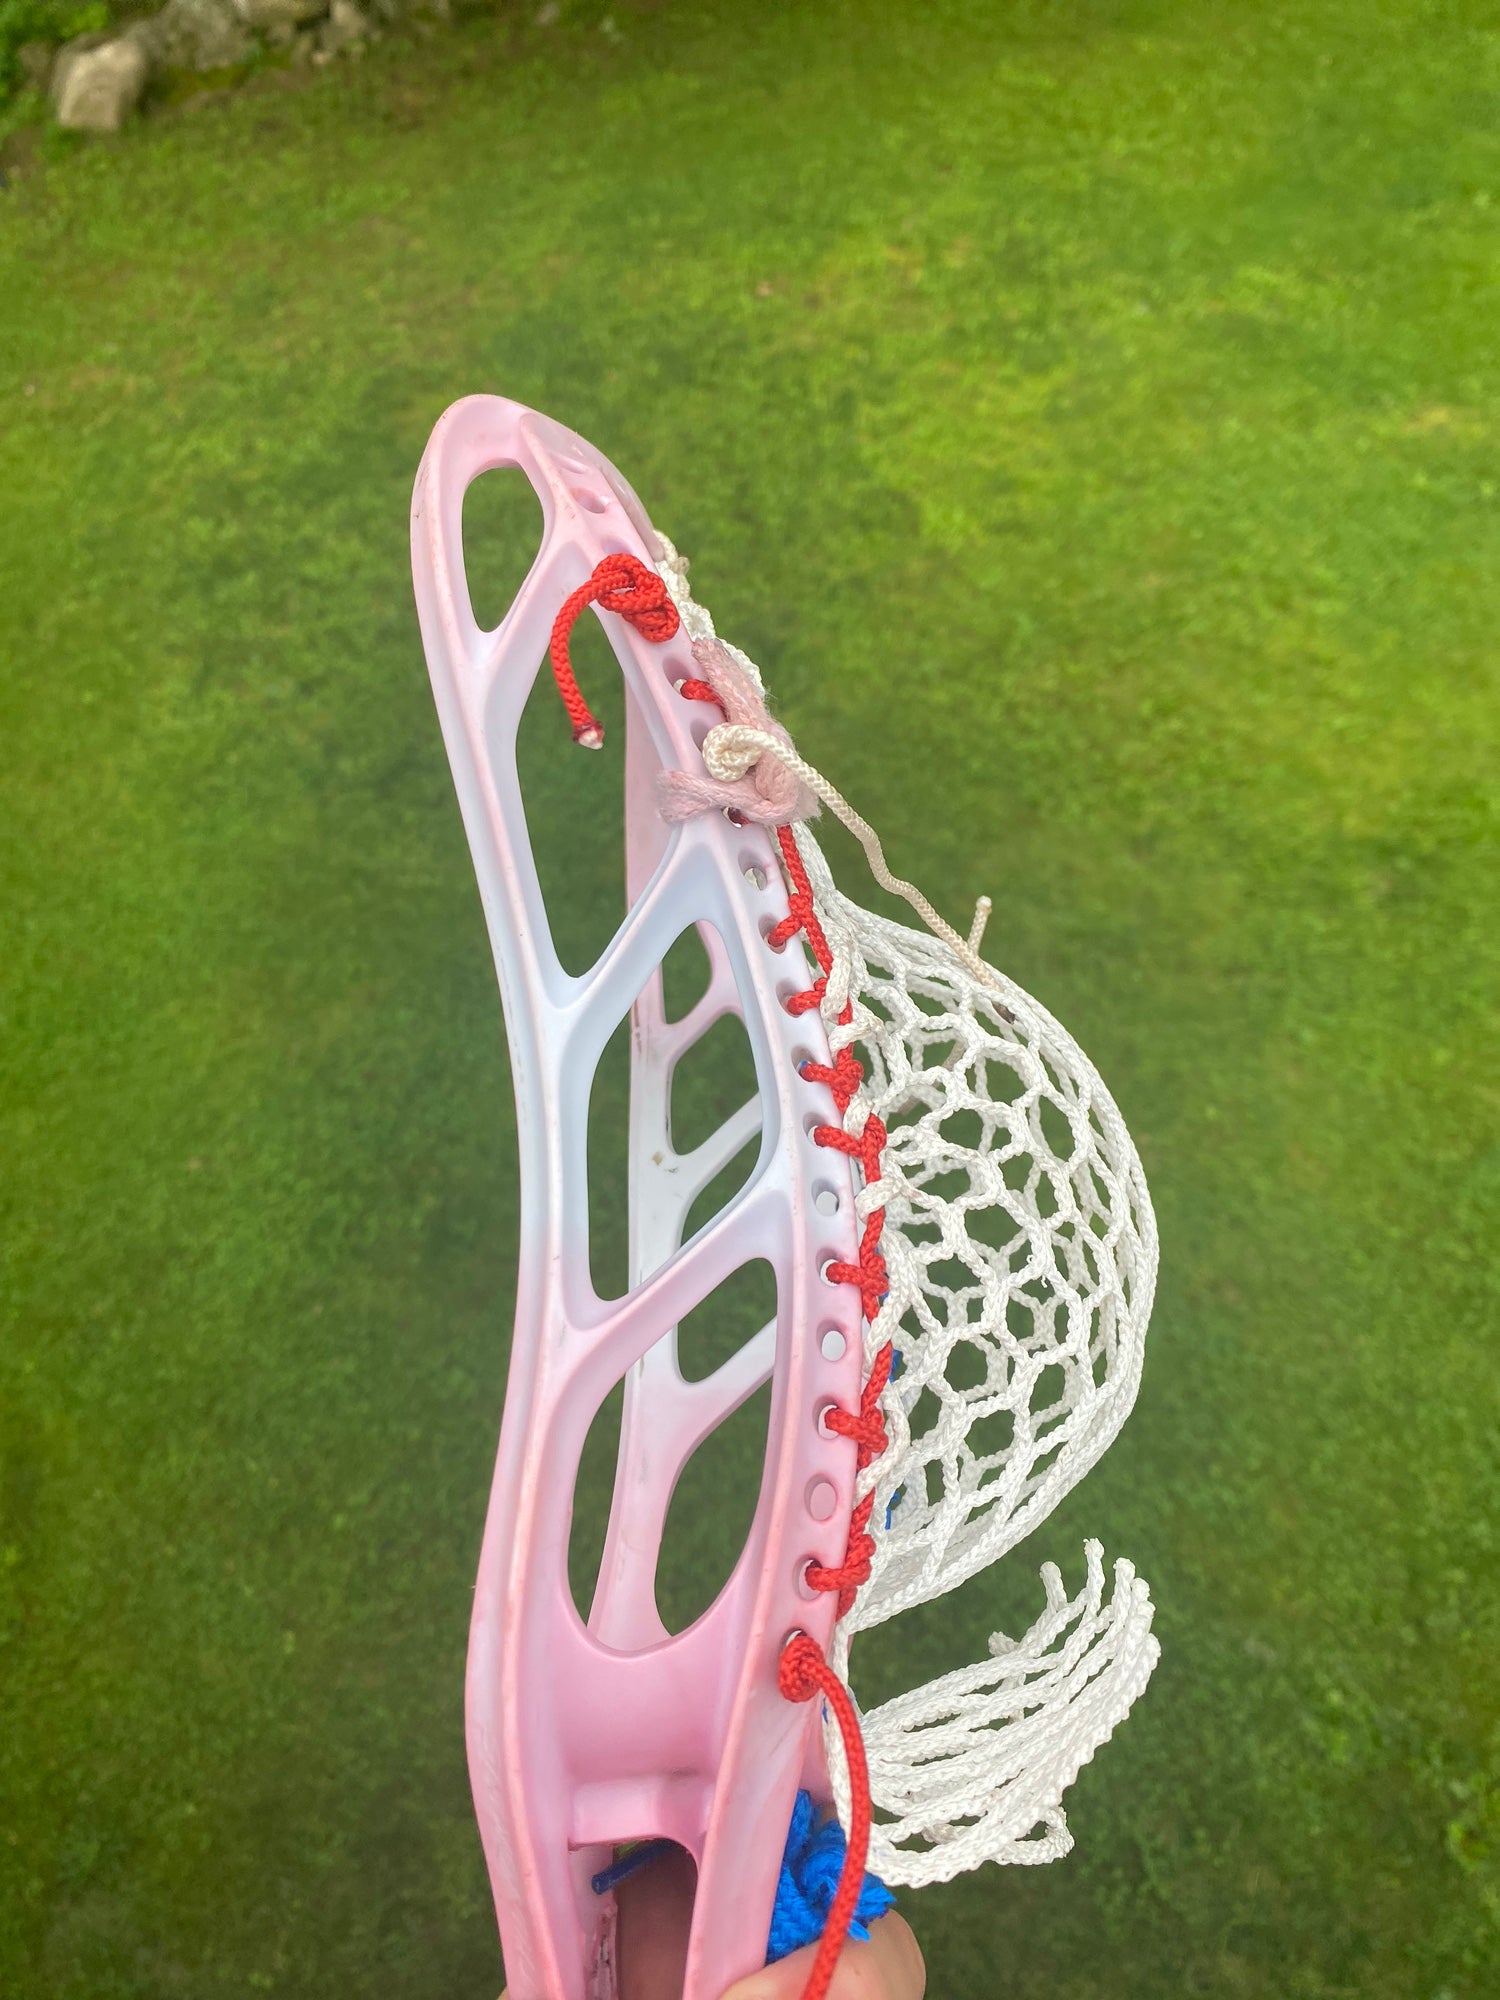 StringKing Lacrosse Tape: Do You Slice Your Own Bread?